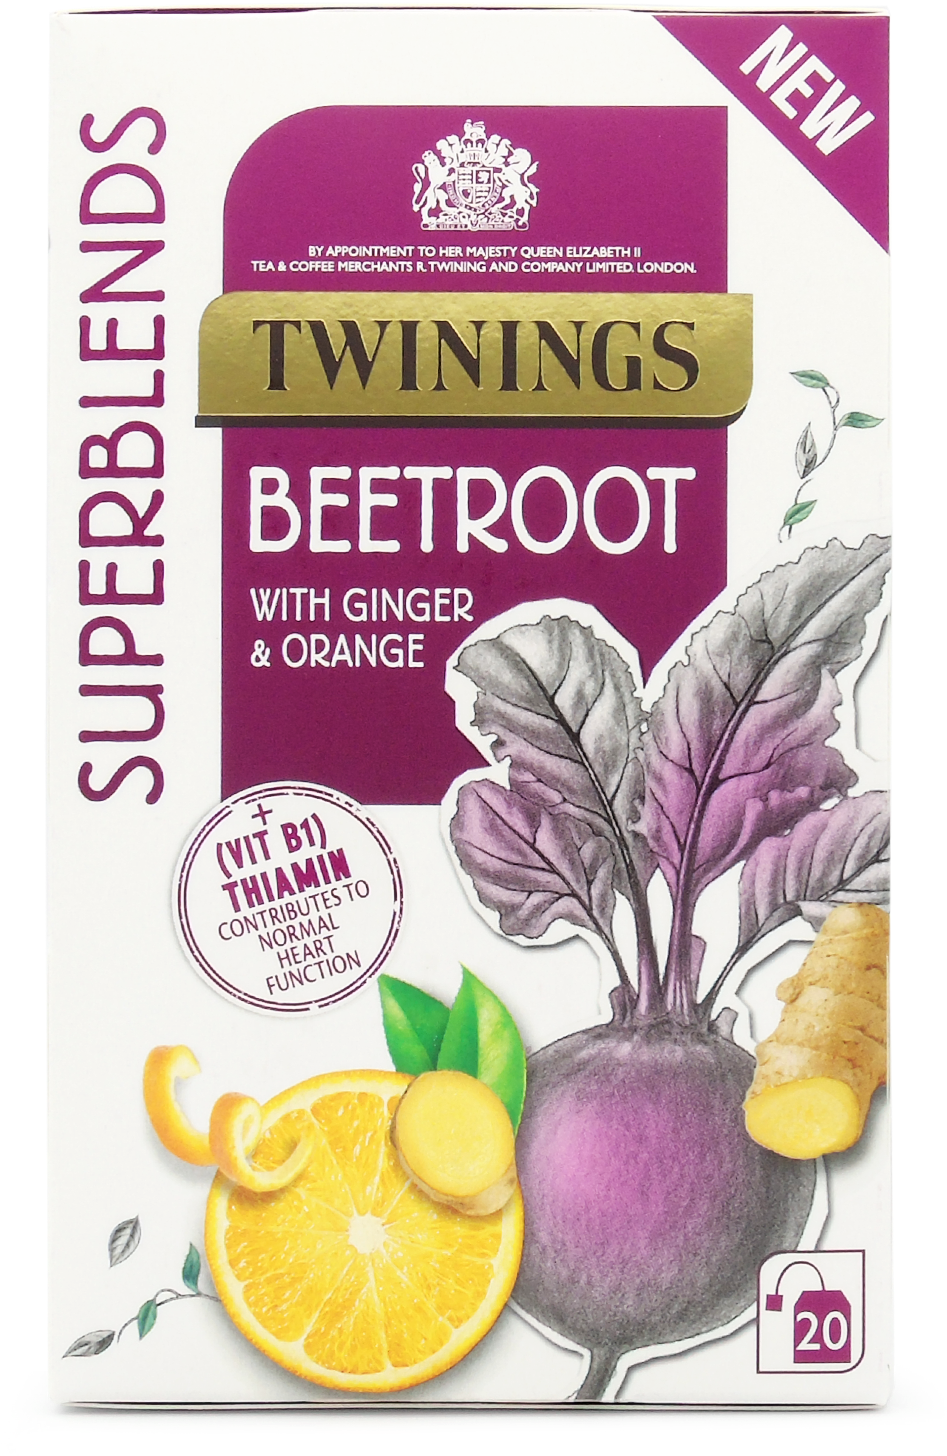 A Package Of Tea With A Picture Of A Beetroot And Lemon